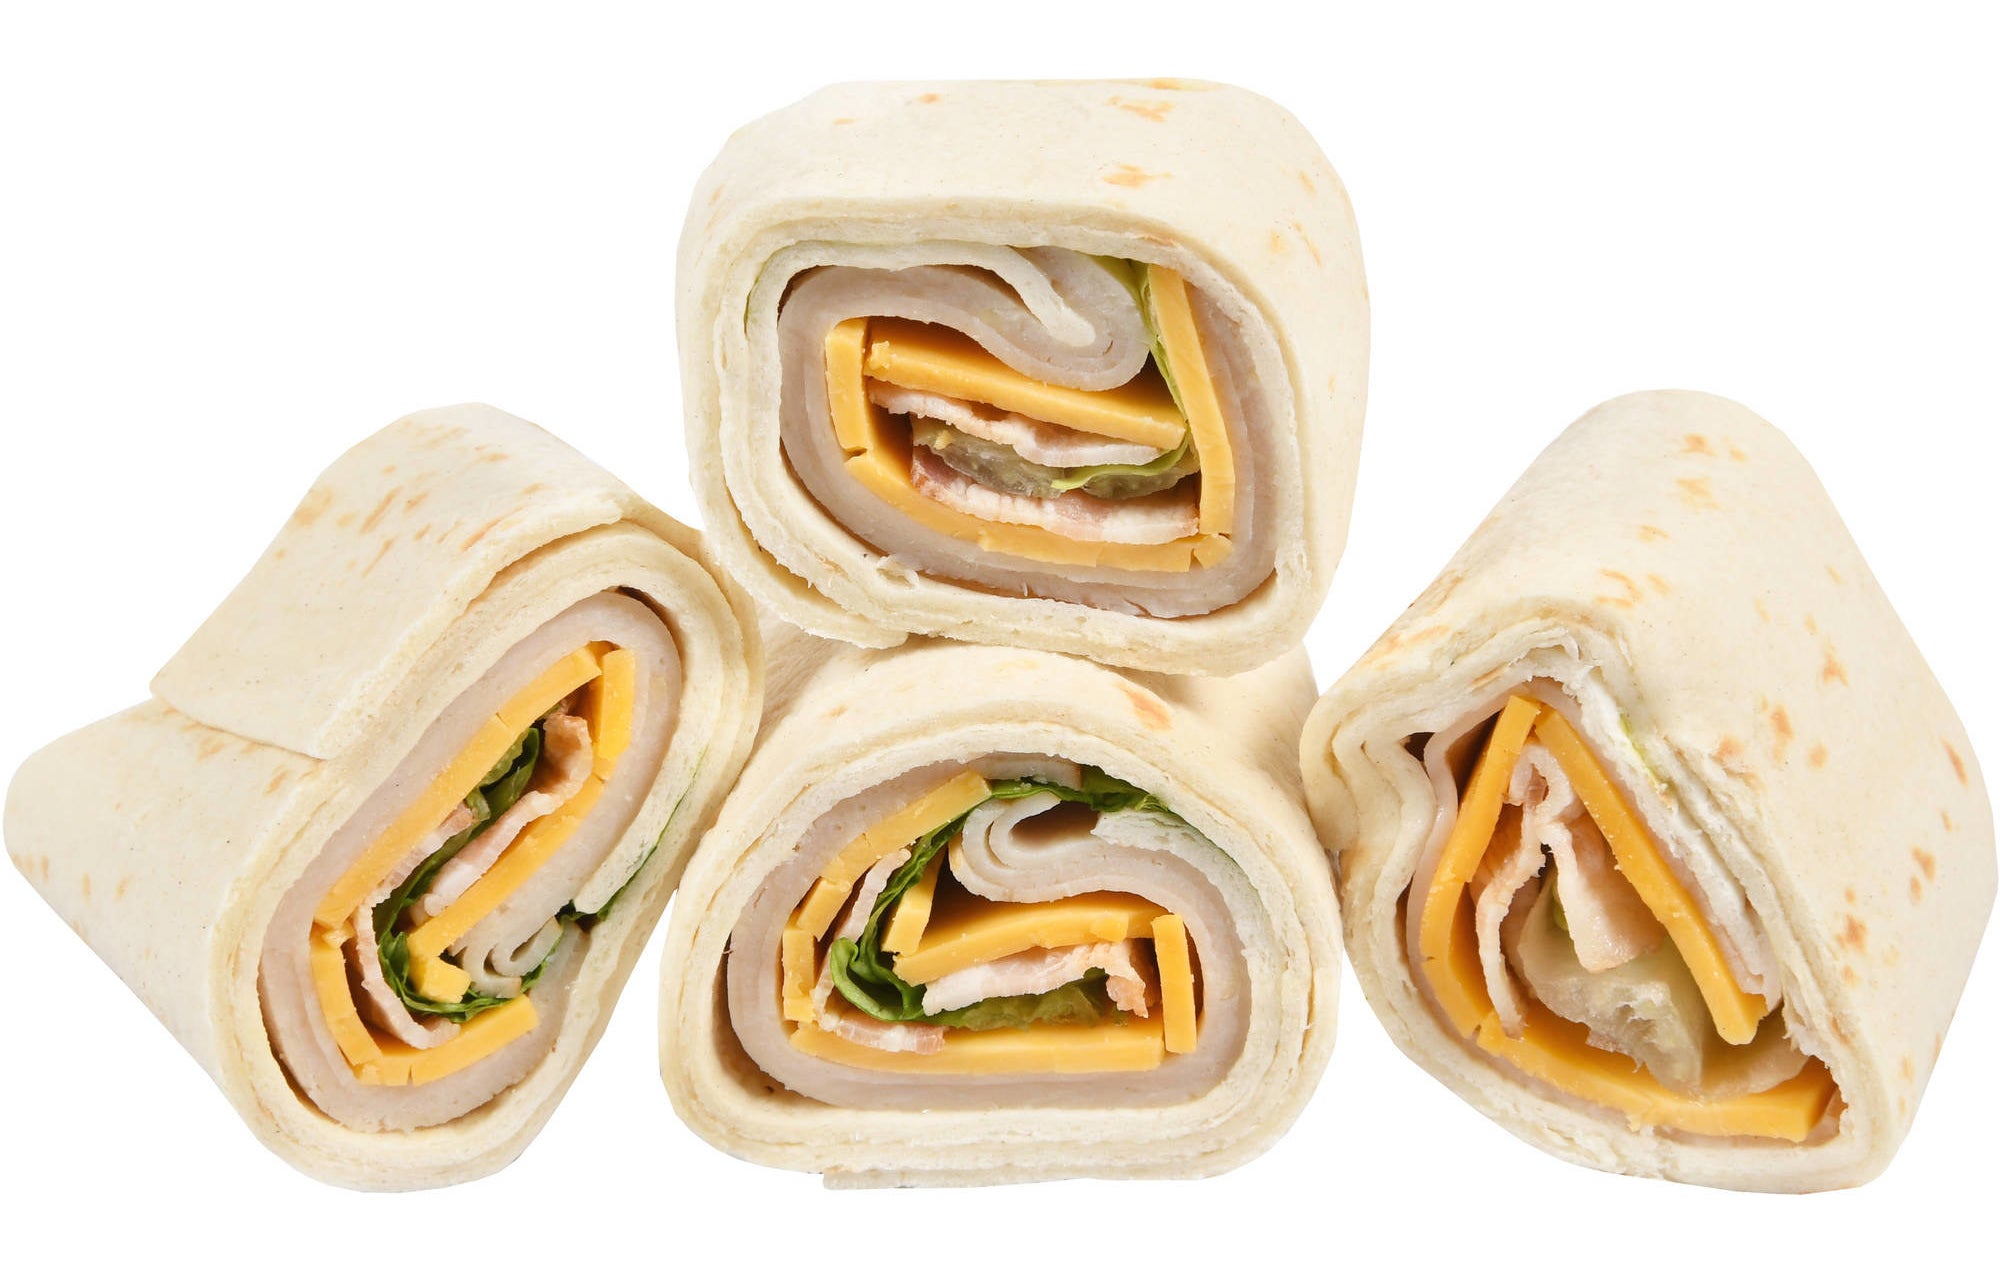 The chicken and cheese wraps cut into four